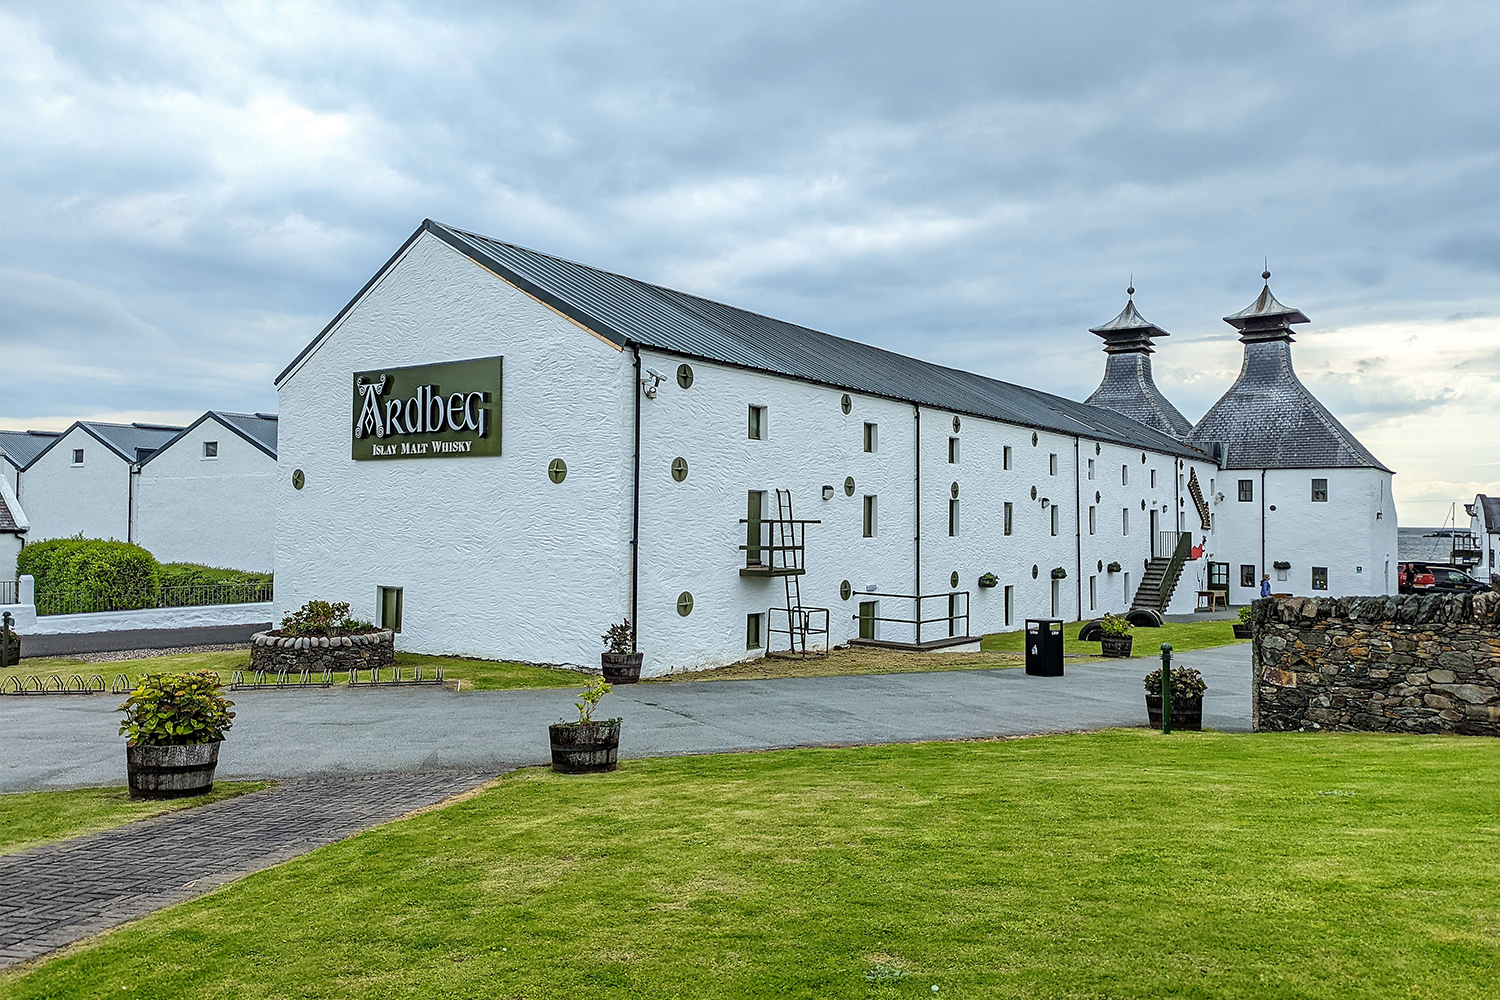 A white building that's part of the Ardbeg Scotch whisky distillery on the island of Islay, Scotland